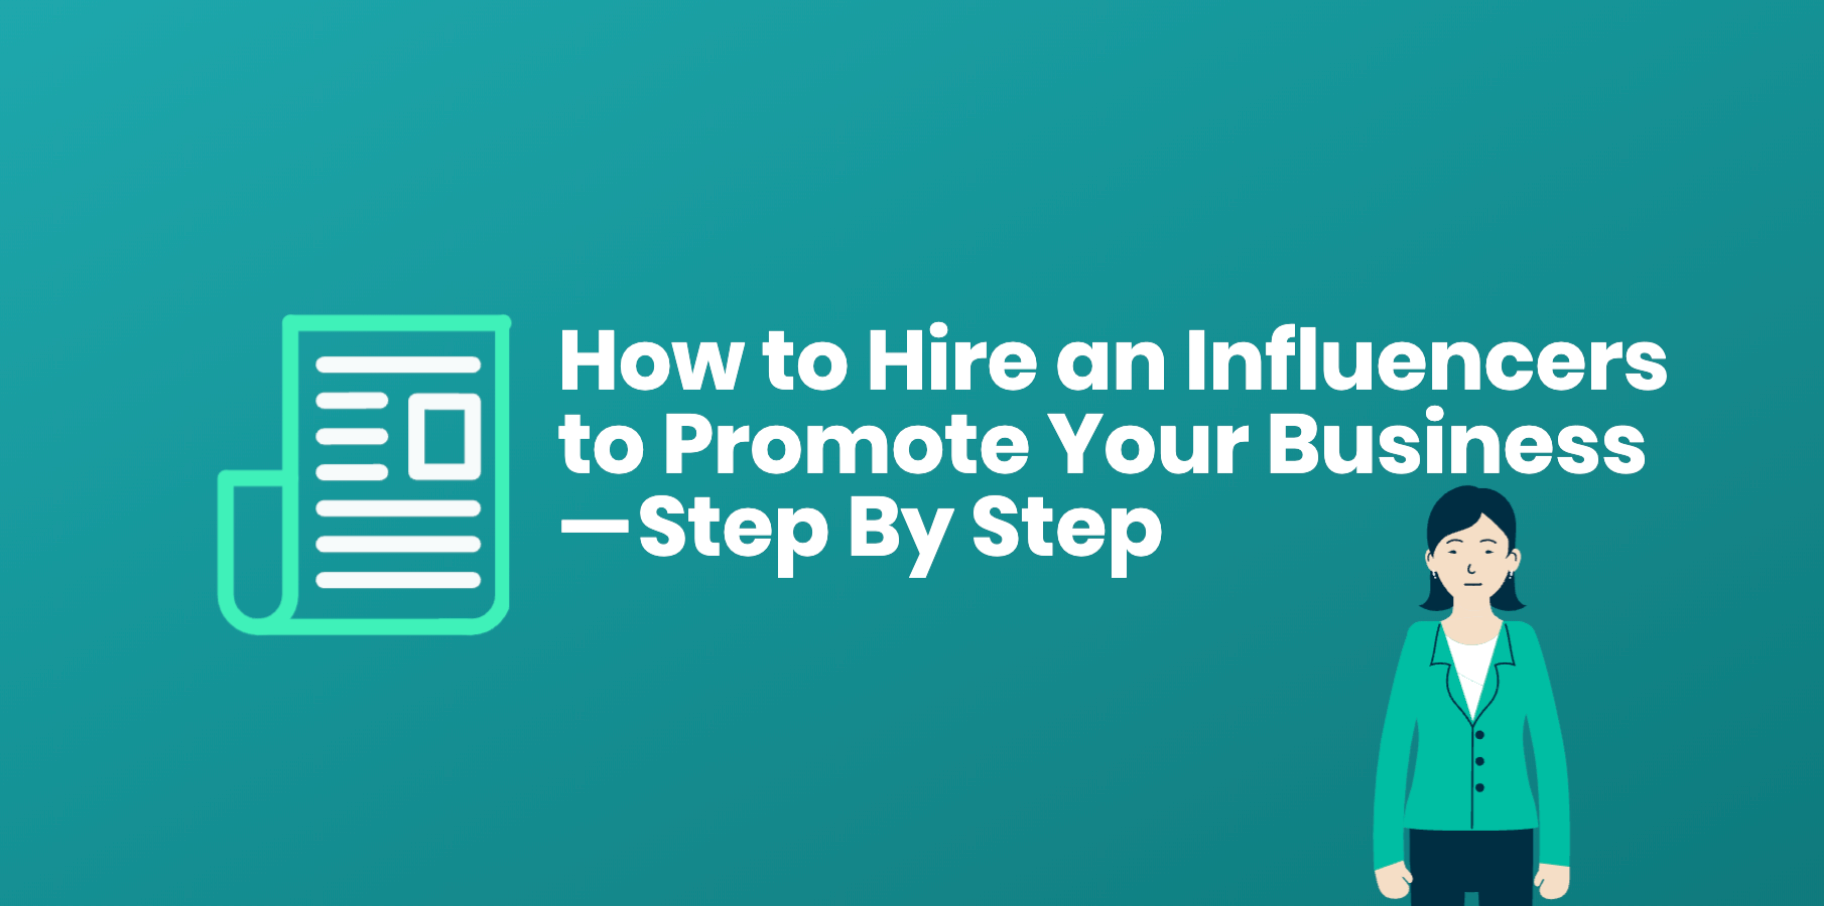 How to Hire an Influencers to Promote Your Business — Step By Step